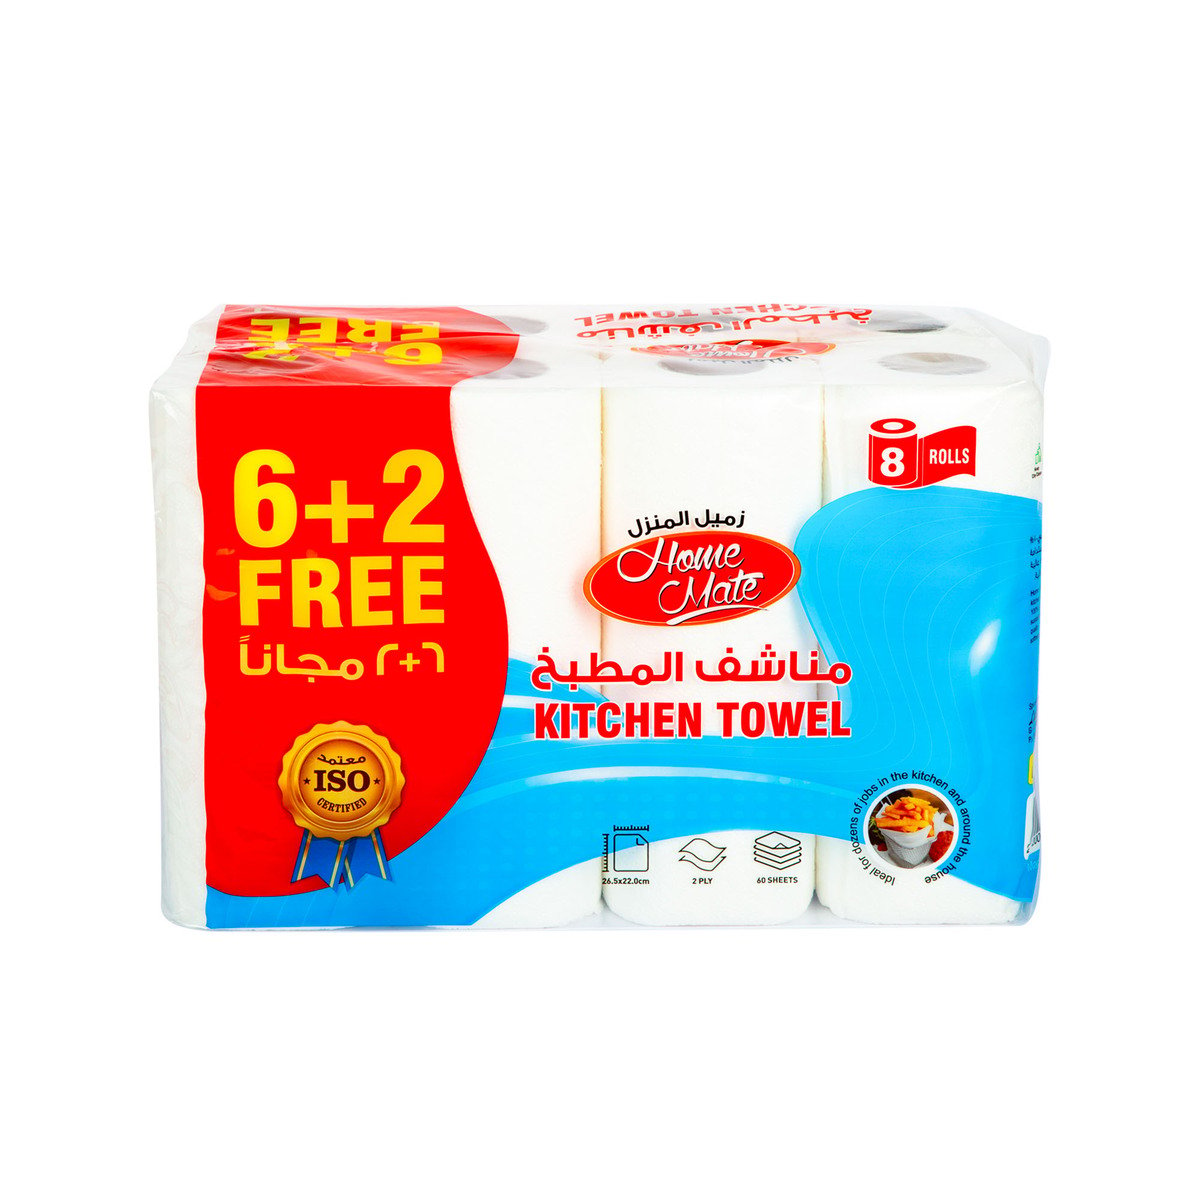 Home Mate Kitchen Towel 2ply 60 Sheets 6+2